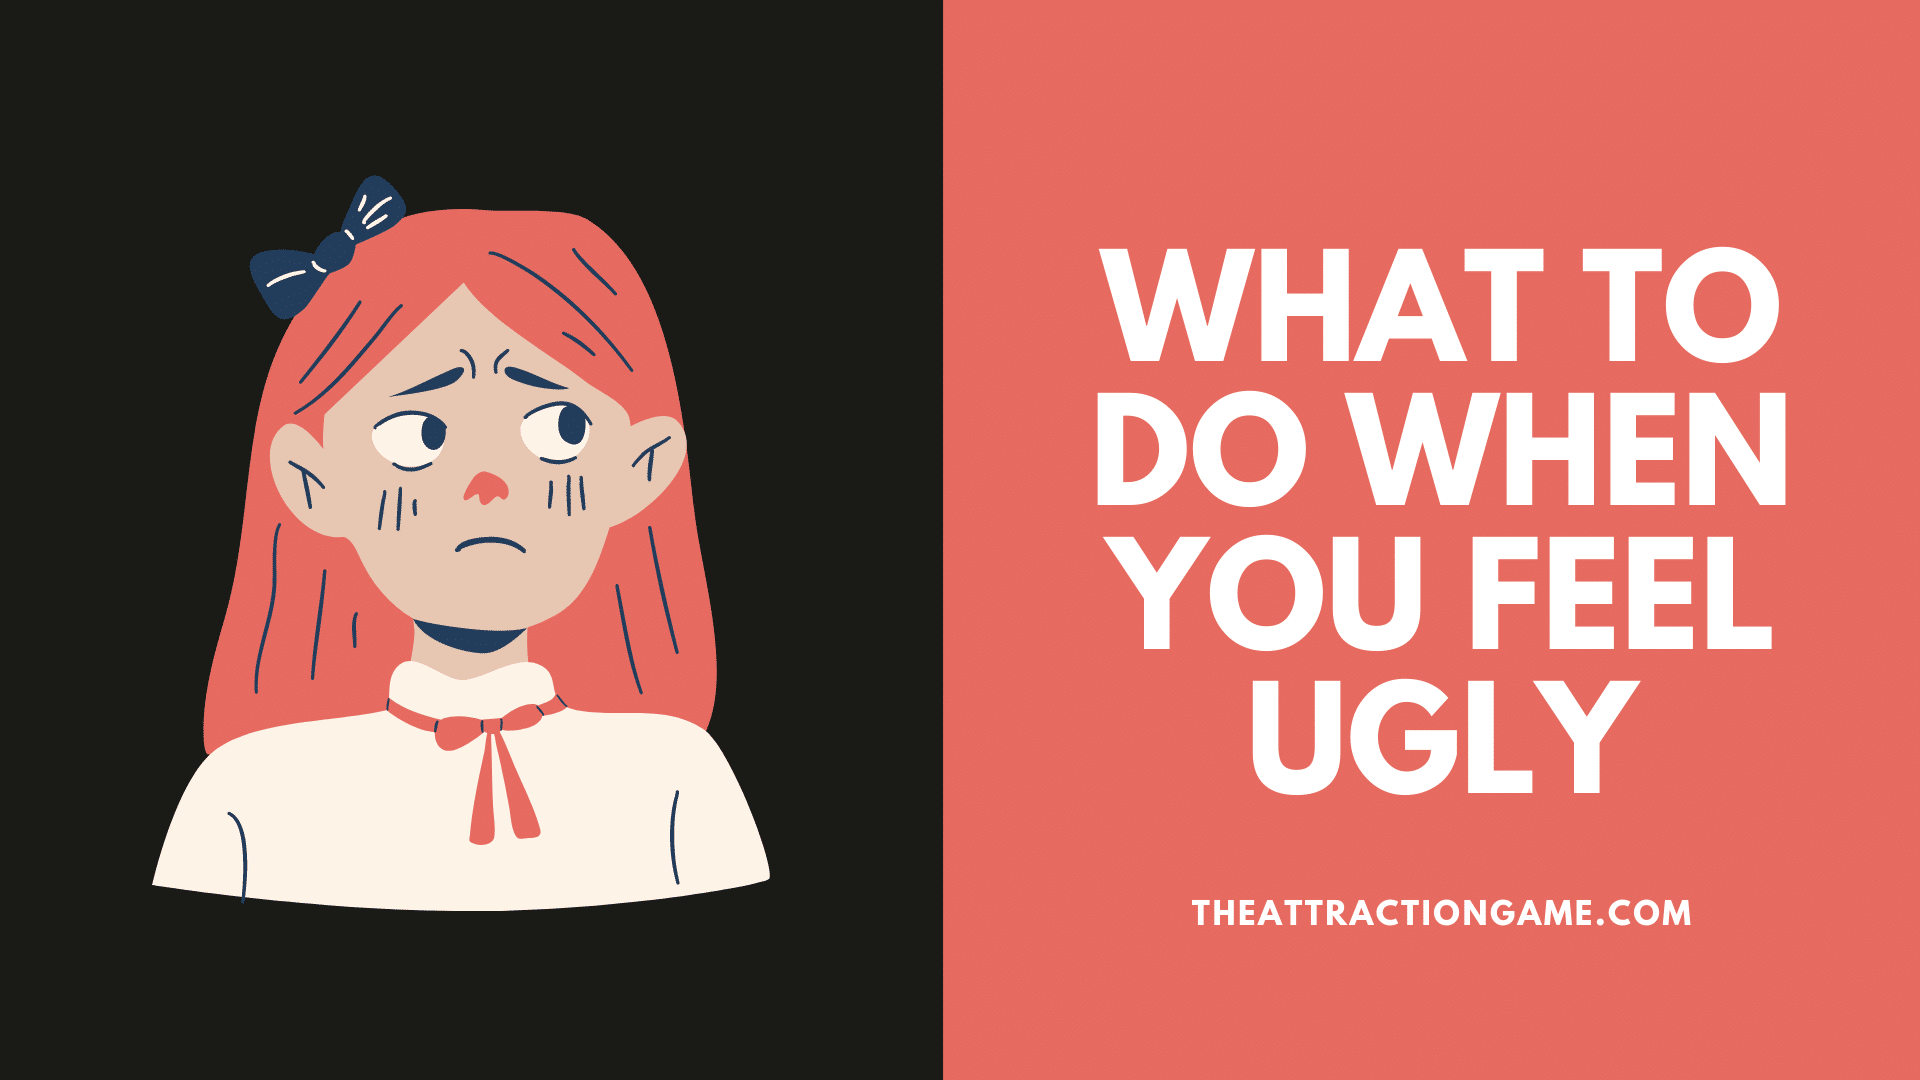 On being ugly